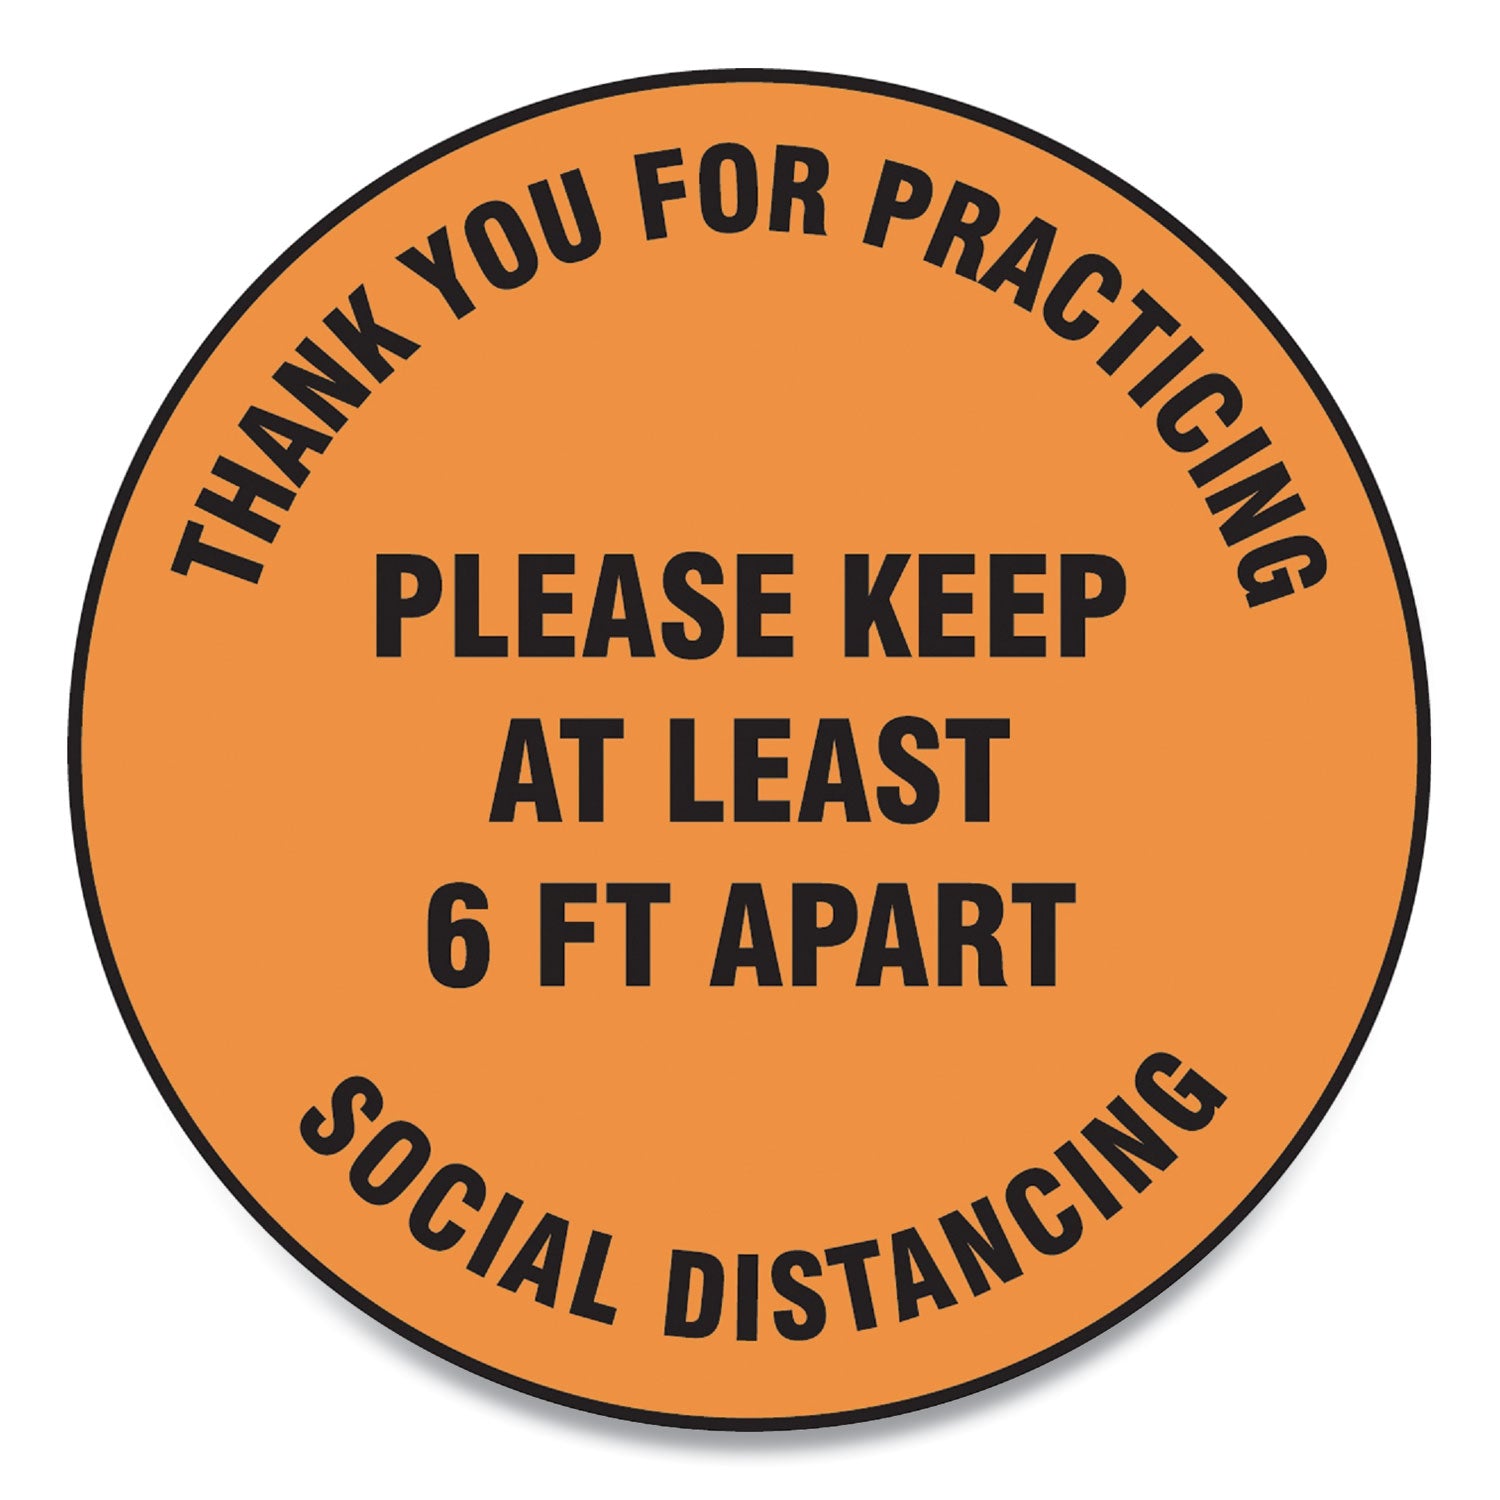 slip-gard-floor-signs-12-circlethank-you-for-practicing-social-distancing-please-keep-at-least-6-ft-apart-orange-25-pk_gn1mfs428esp - 1